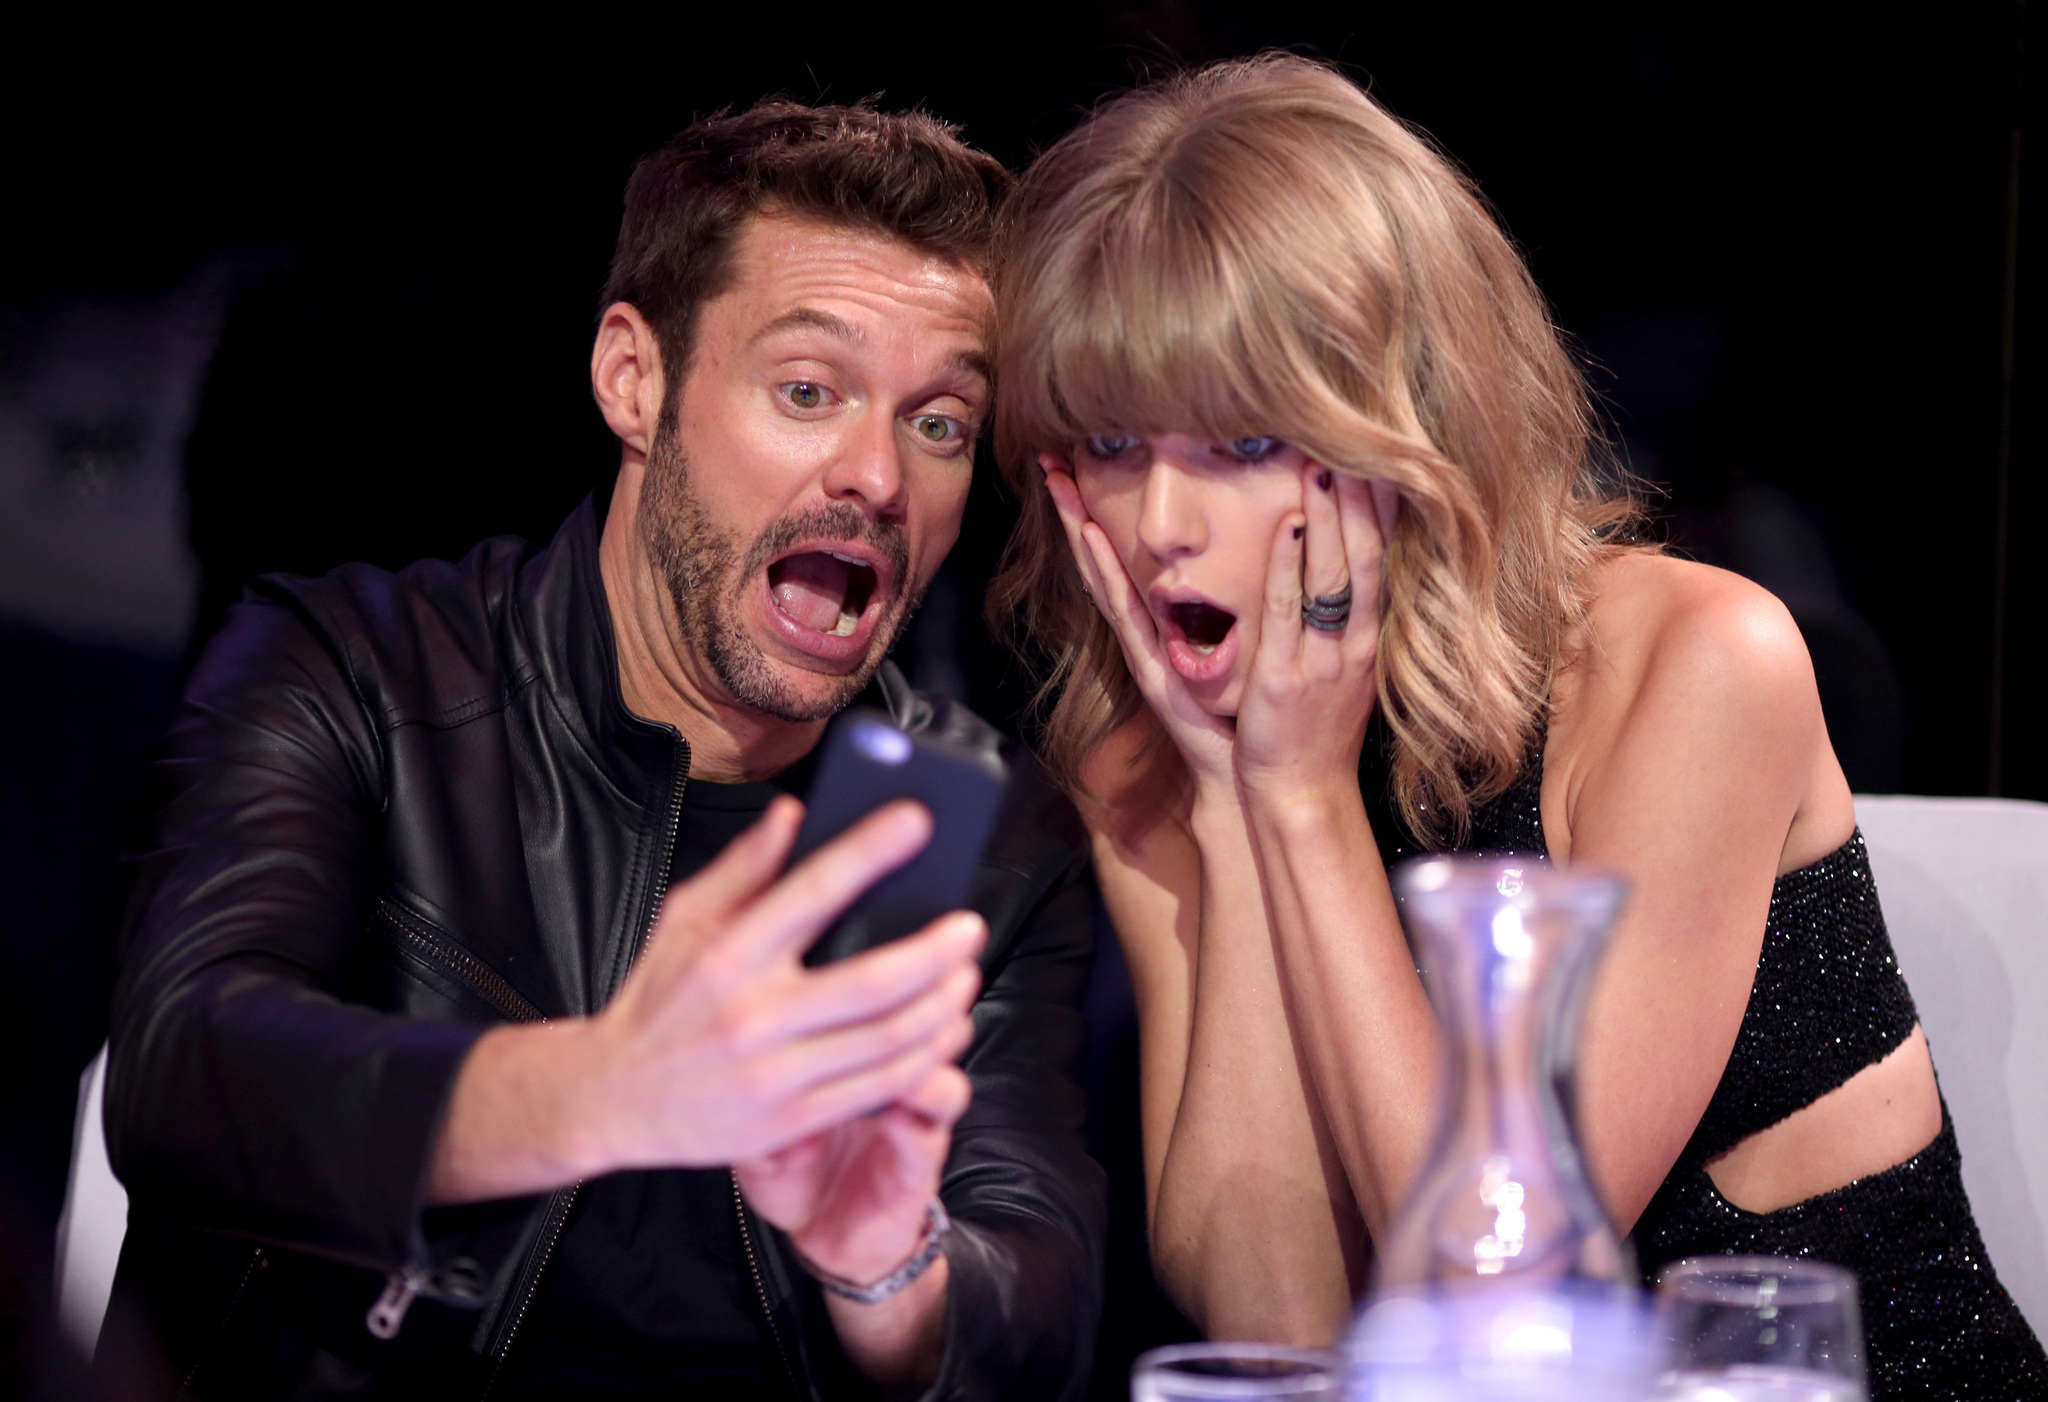 Ryan Seacrest and Taylor Swift at event of IHeartRadio Music Awards (2015)